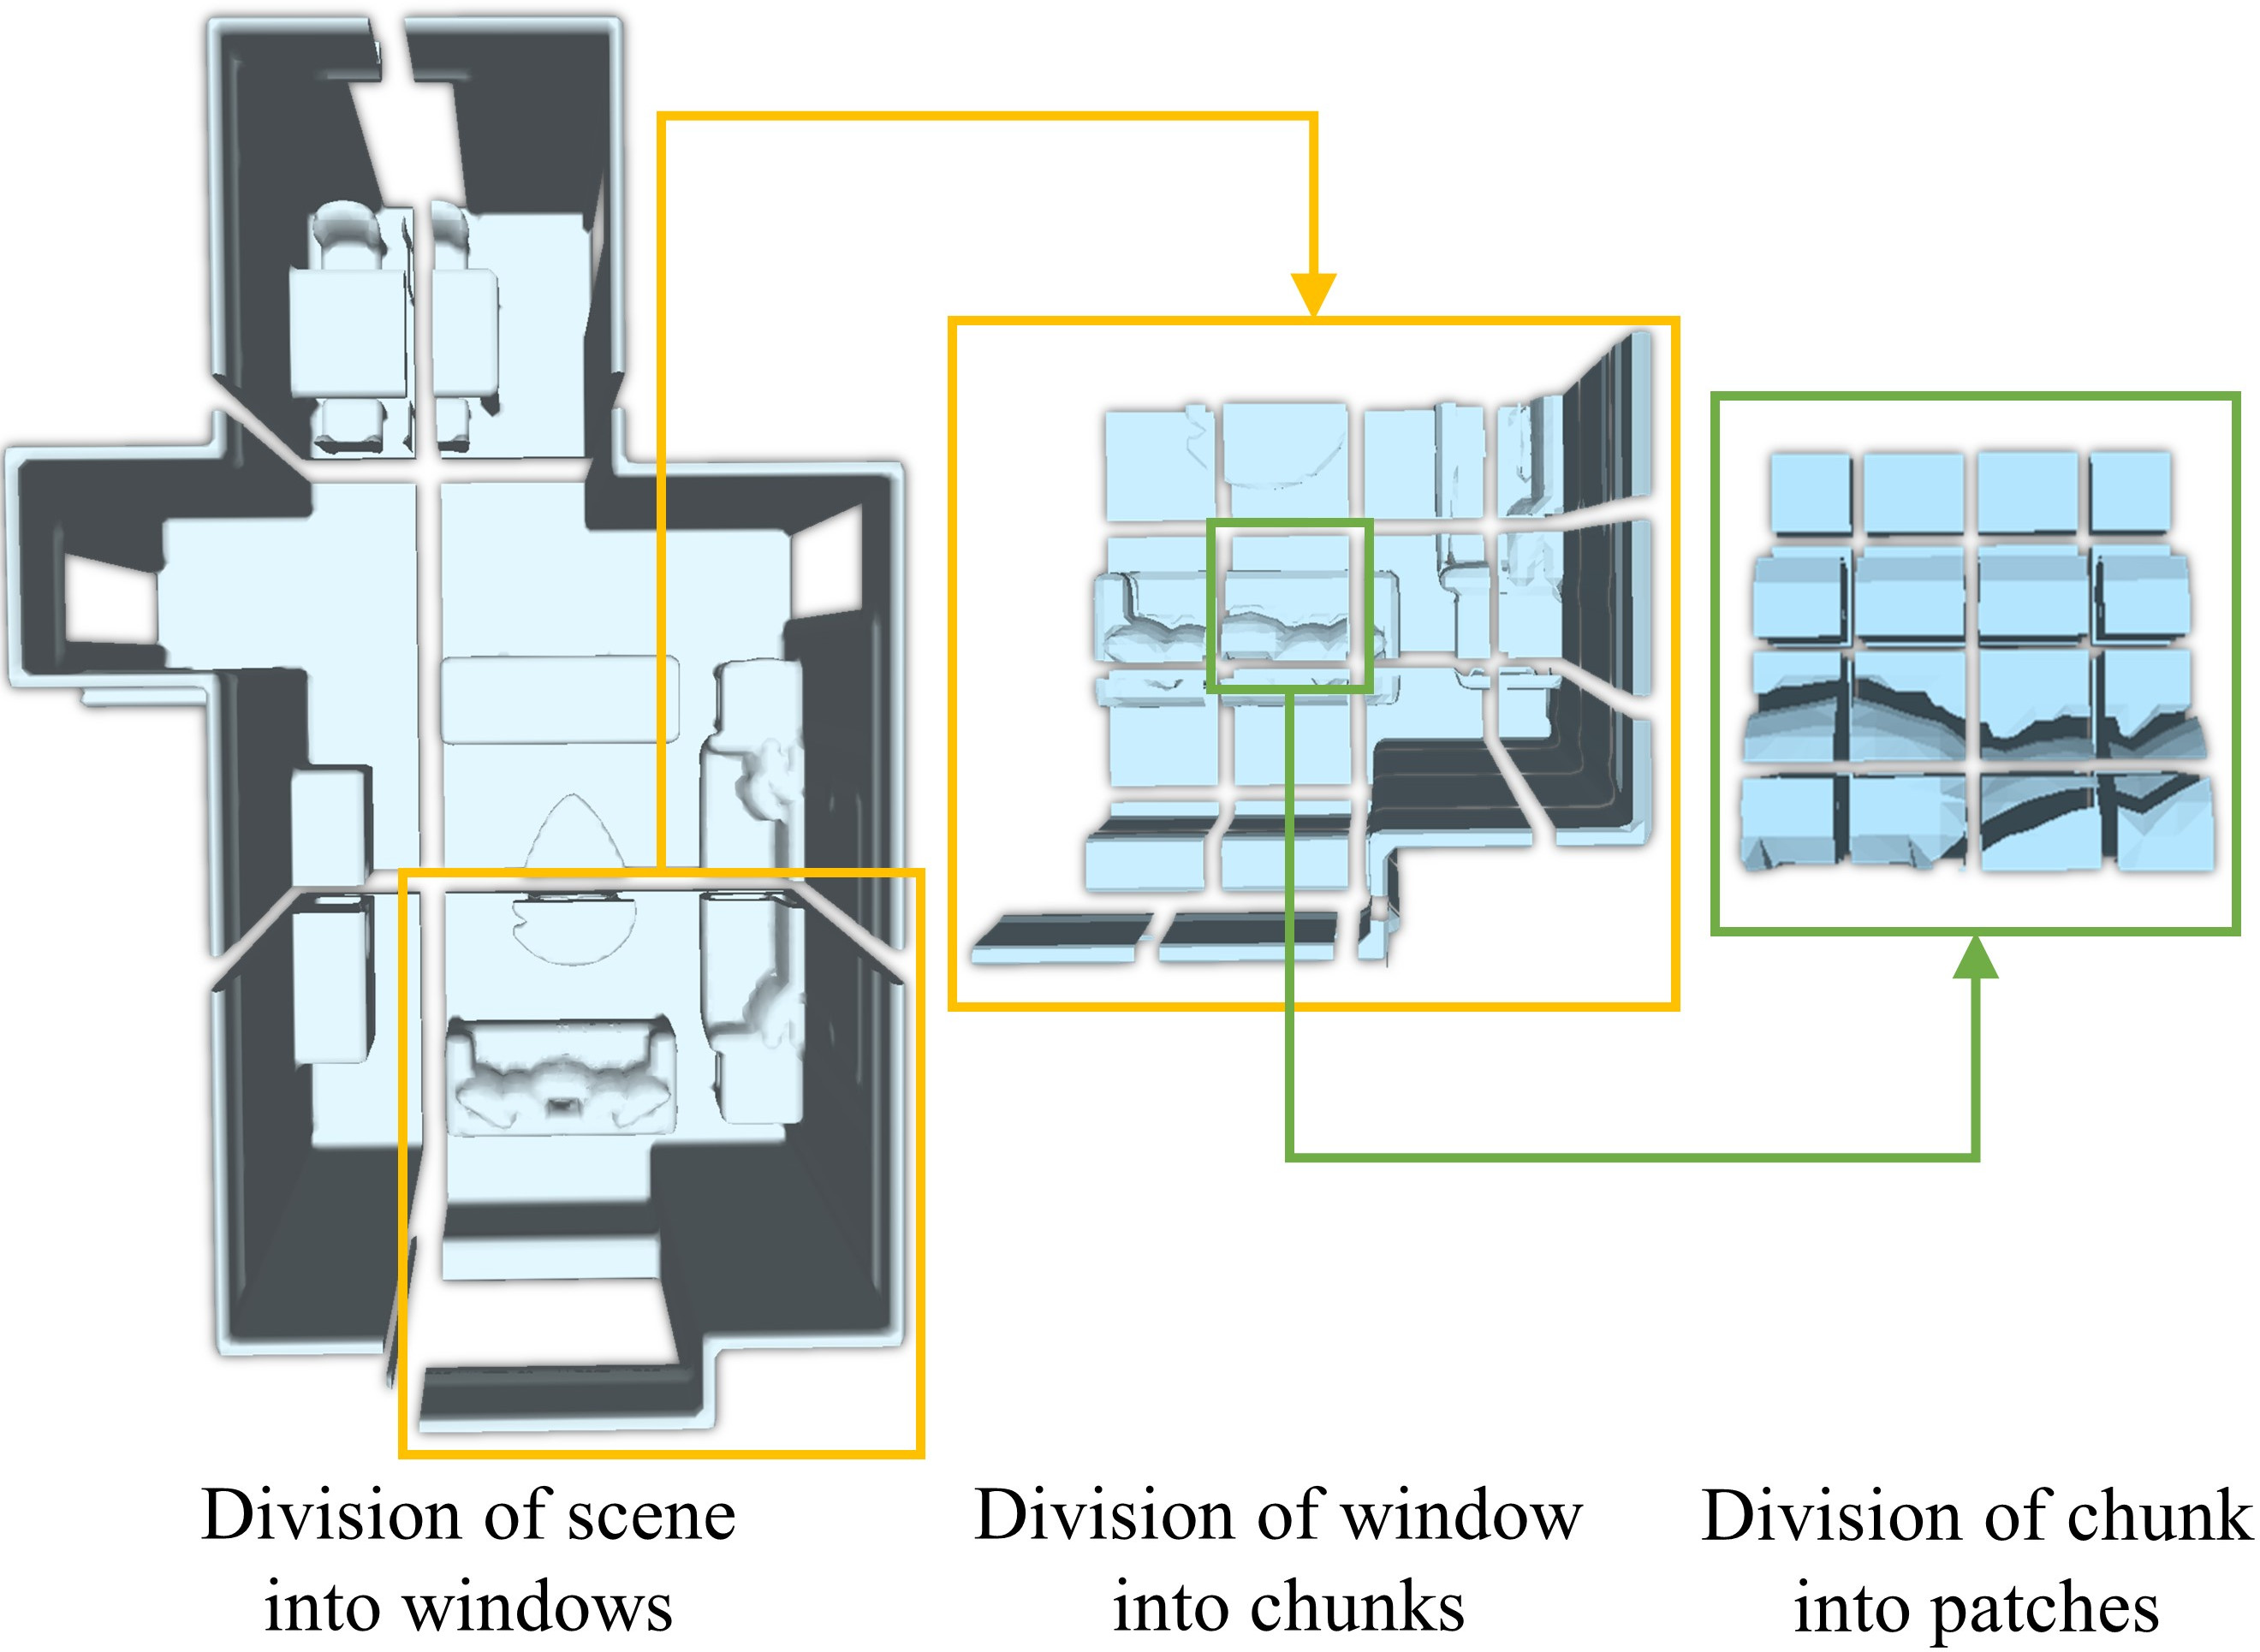 Levels of operation|In our experiments, we use 64<sup>3</sup> target chunks for target geometry, and larger scenes work in a sliding window fashion (left). The retrieval candidates are 16<sup>3</sup> chunks (middle), and attention-based blending works on 4<sup>3</sup> patches (right).